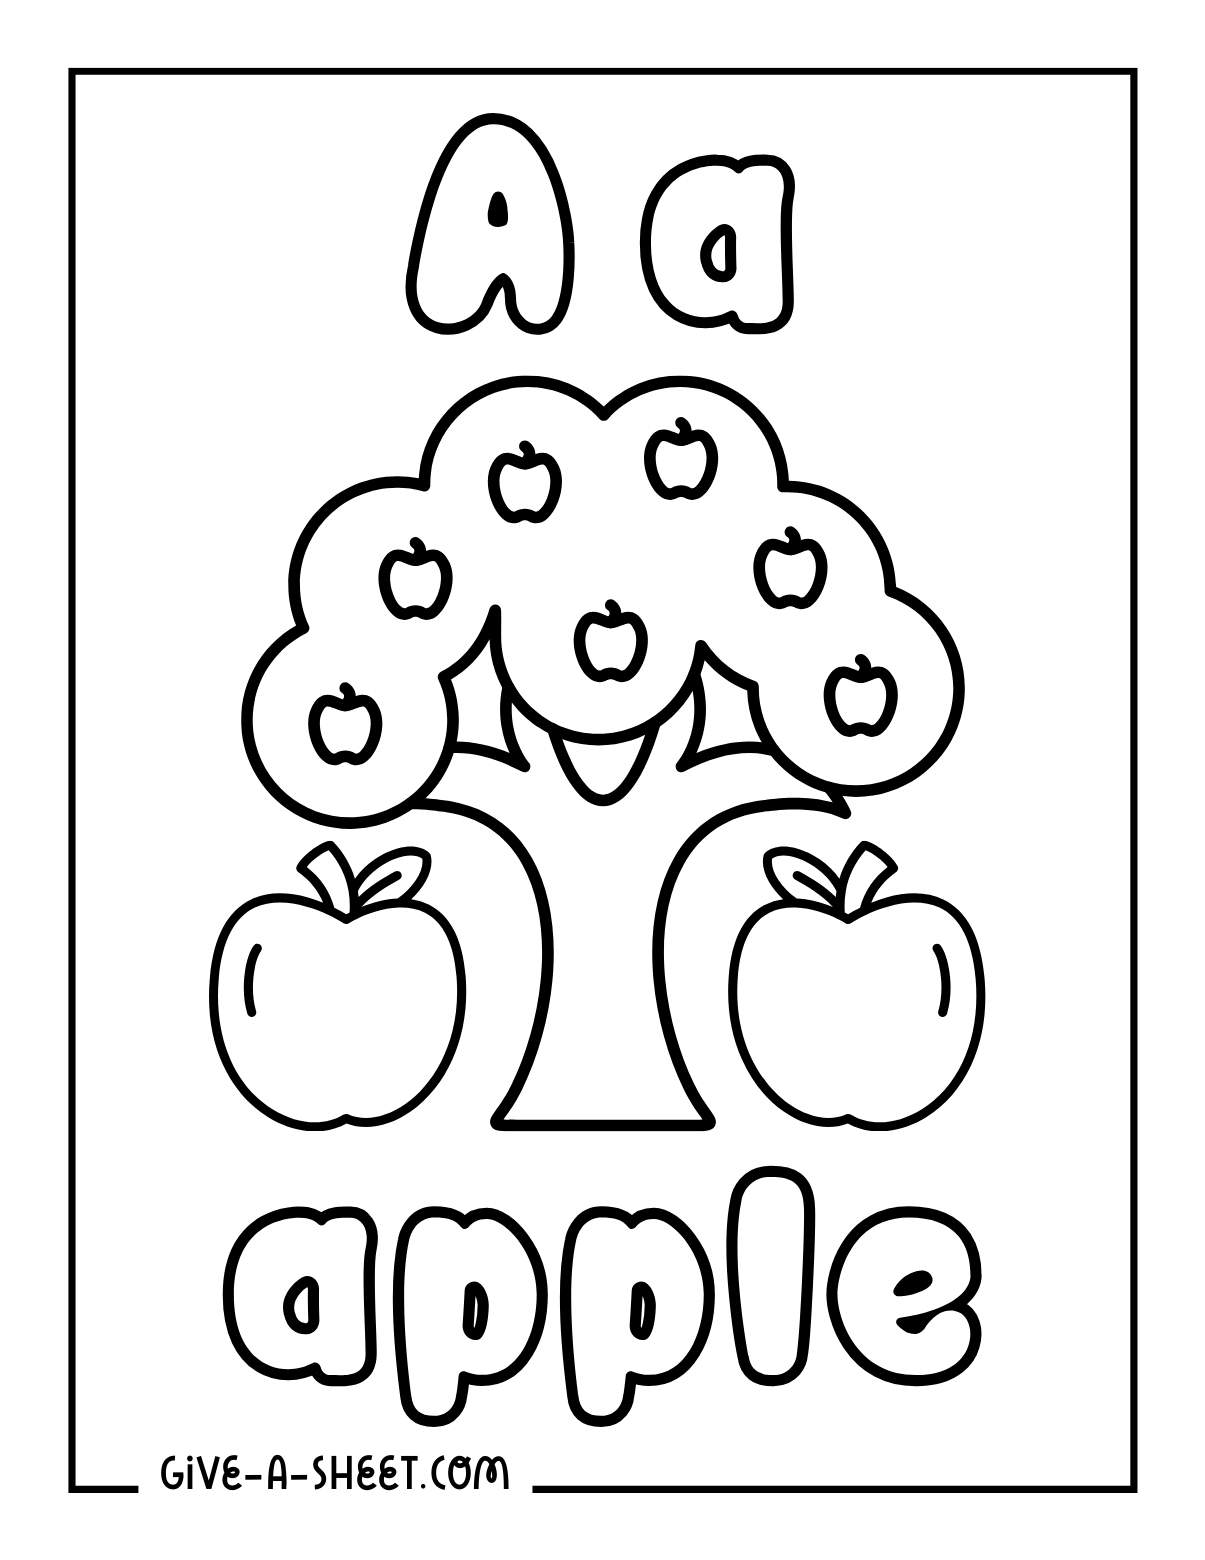 Apple tree letter association coloring page for preschool.